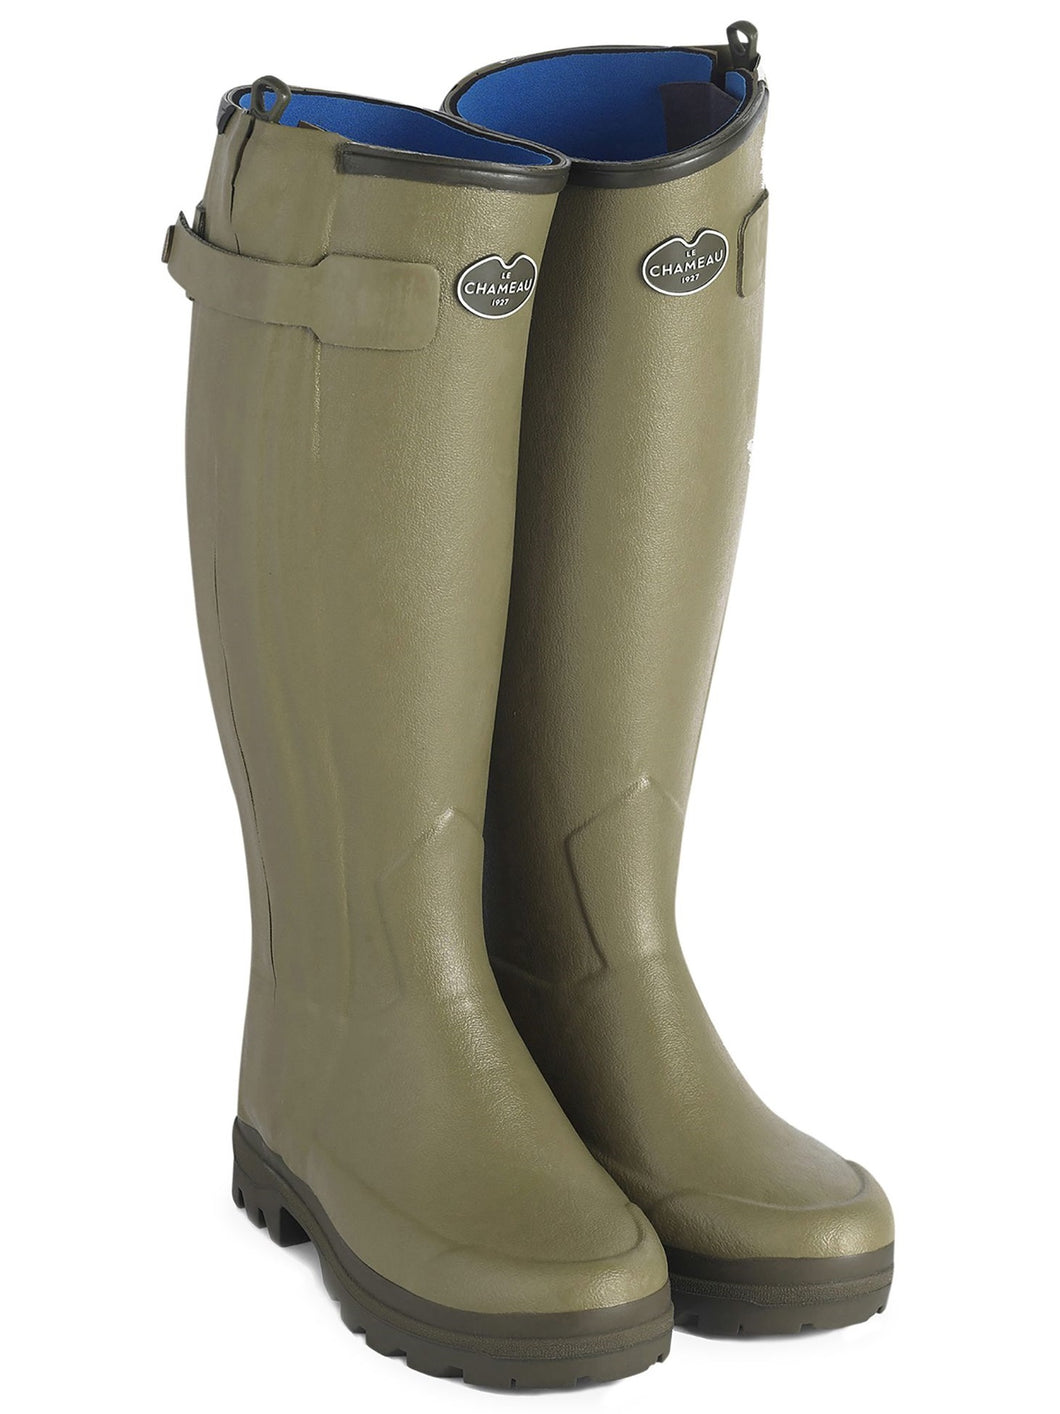 LE CHAMEAU Chasseur Boots - Ladies Neoprene Lined Full Zip - Iconic Green